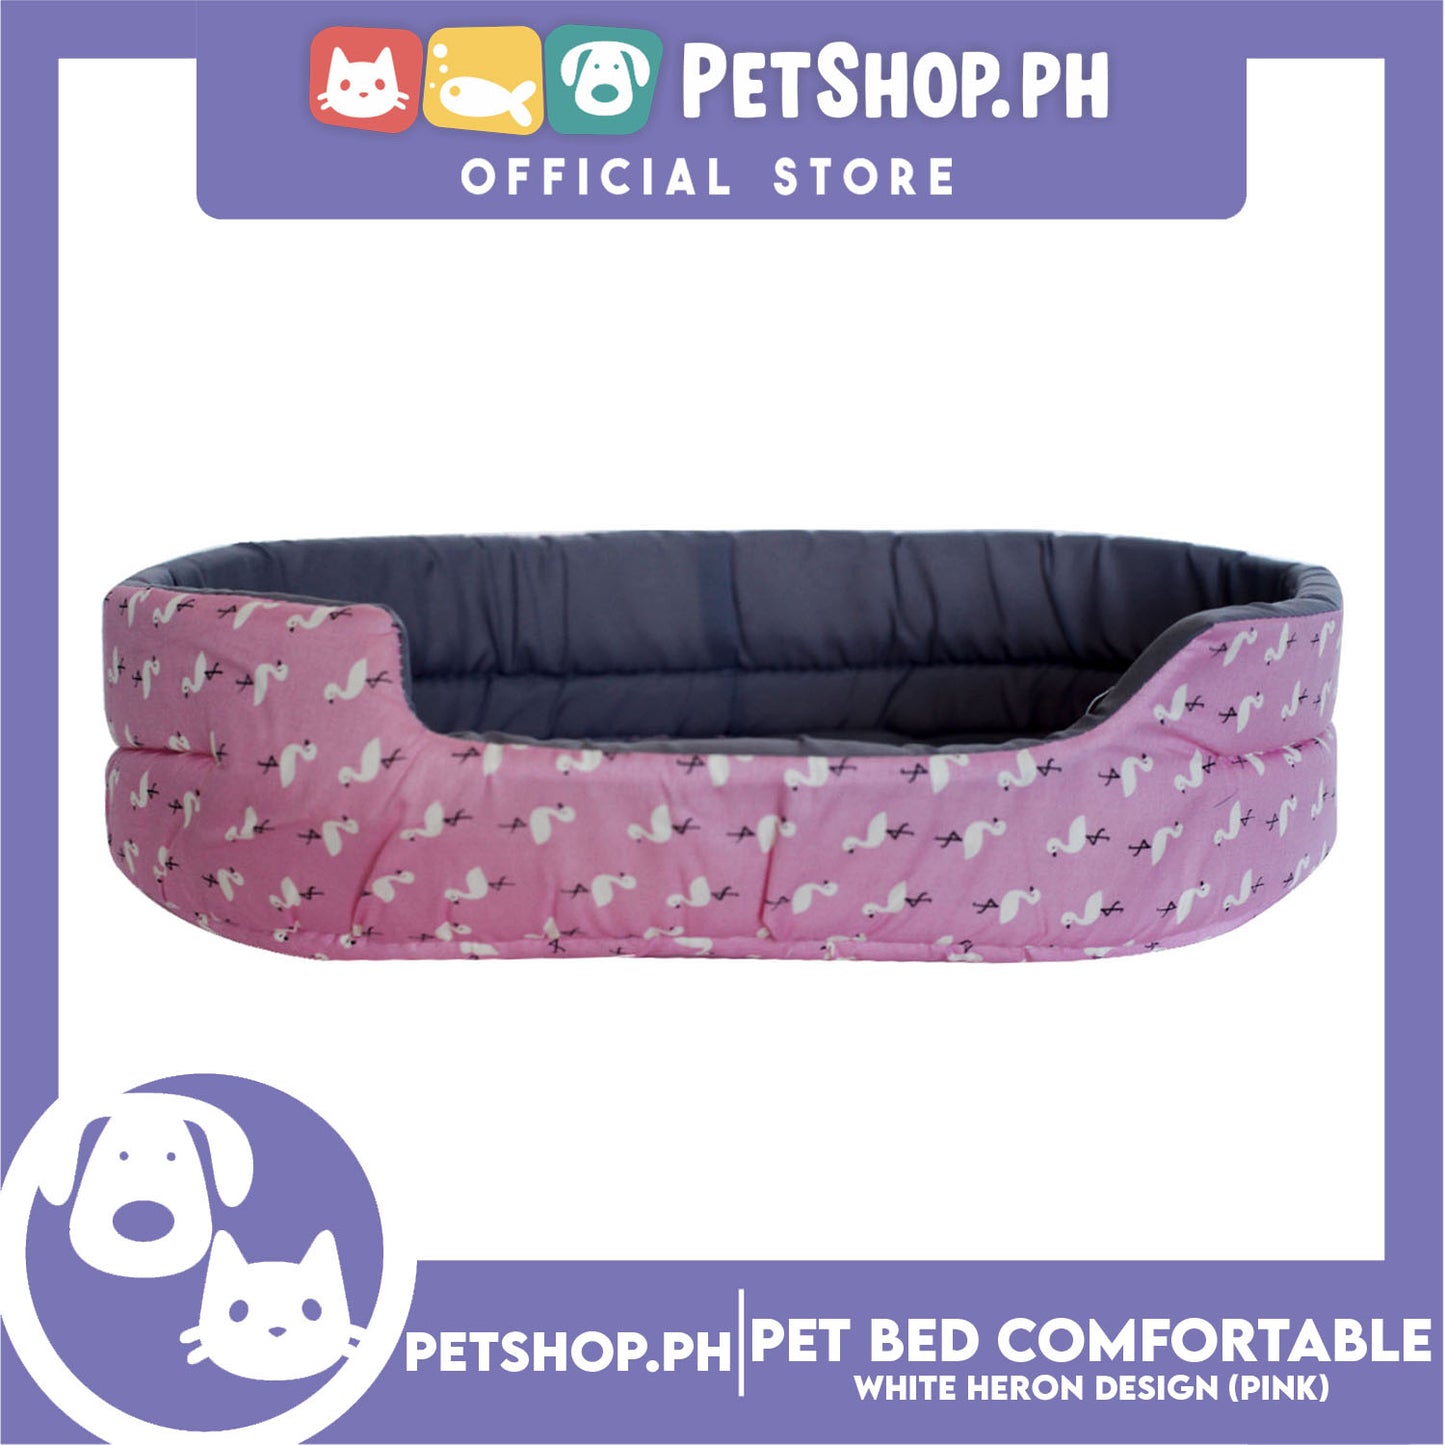 Pet Bed Comfortable Sleeping Bed with White Heron Design 47x36x11cm for Dogs & Cats Pink